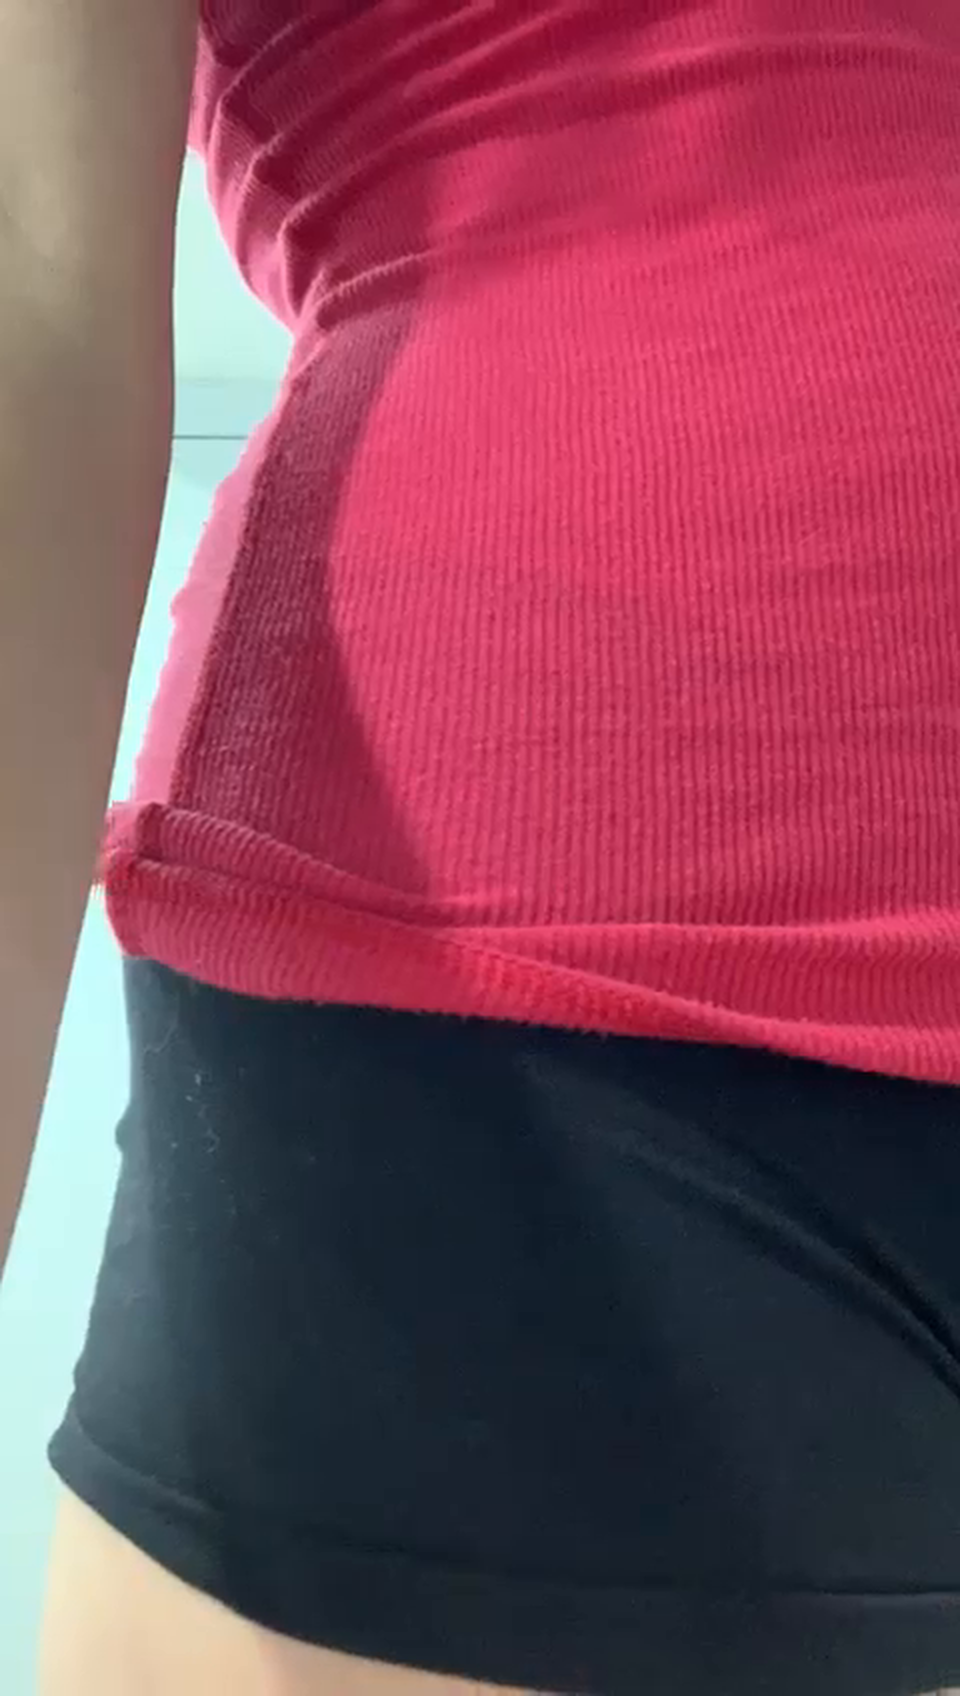 Watch the Video by Addicktedvictor3 with the username @Addicktedvictor3, posted on April 21, 2020. The post is about the topic Teen. and the text says 'How fucking hot is this gorgeous teen?  What an amazing body!'